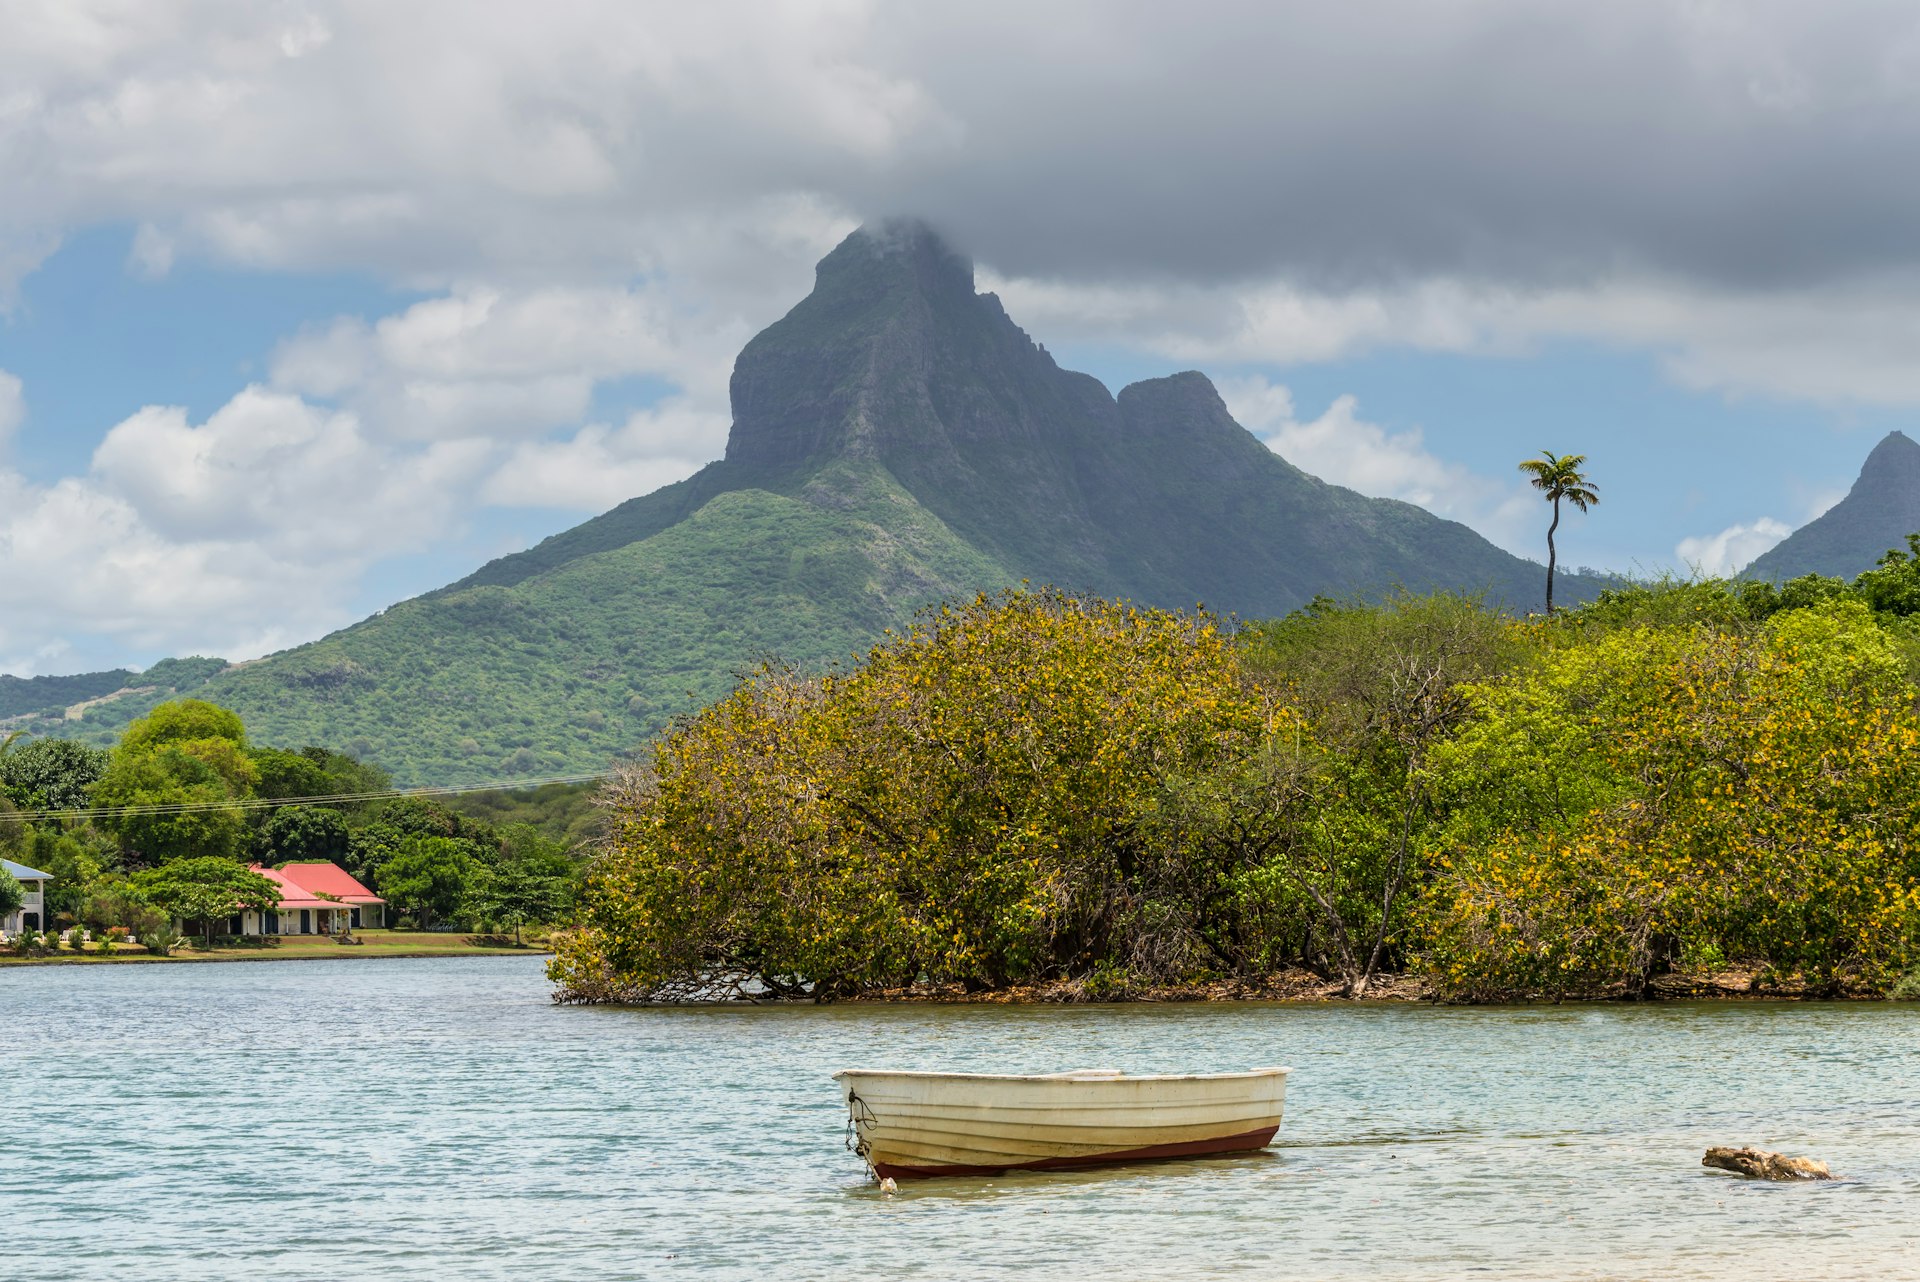 A large peak looms over a tropical coastline packed with foliage